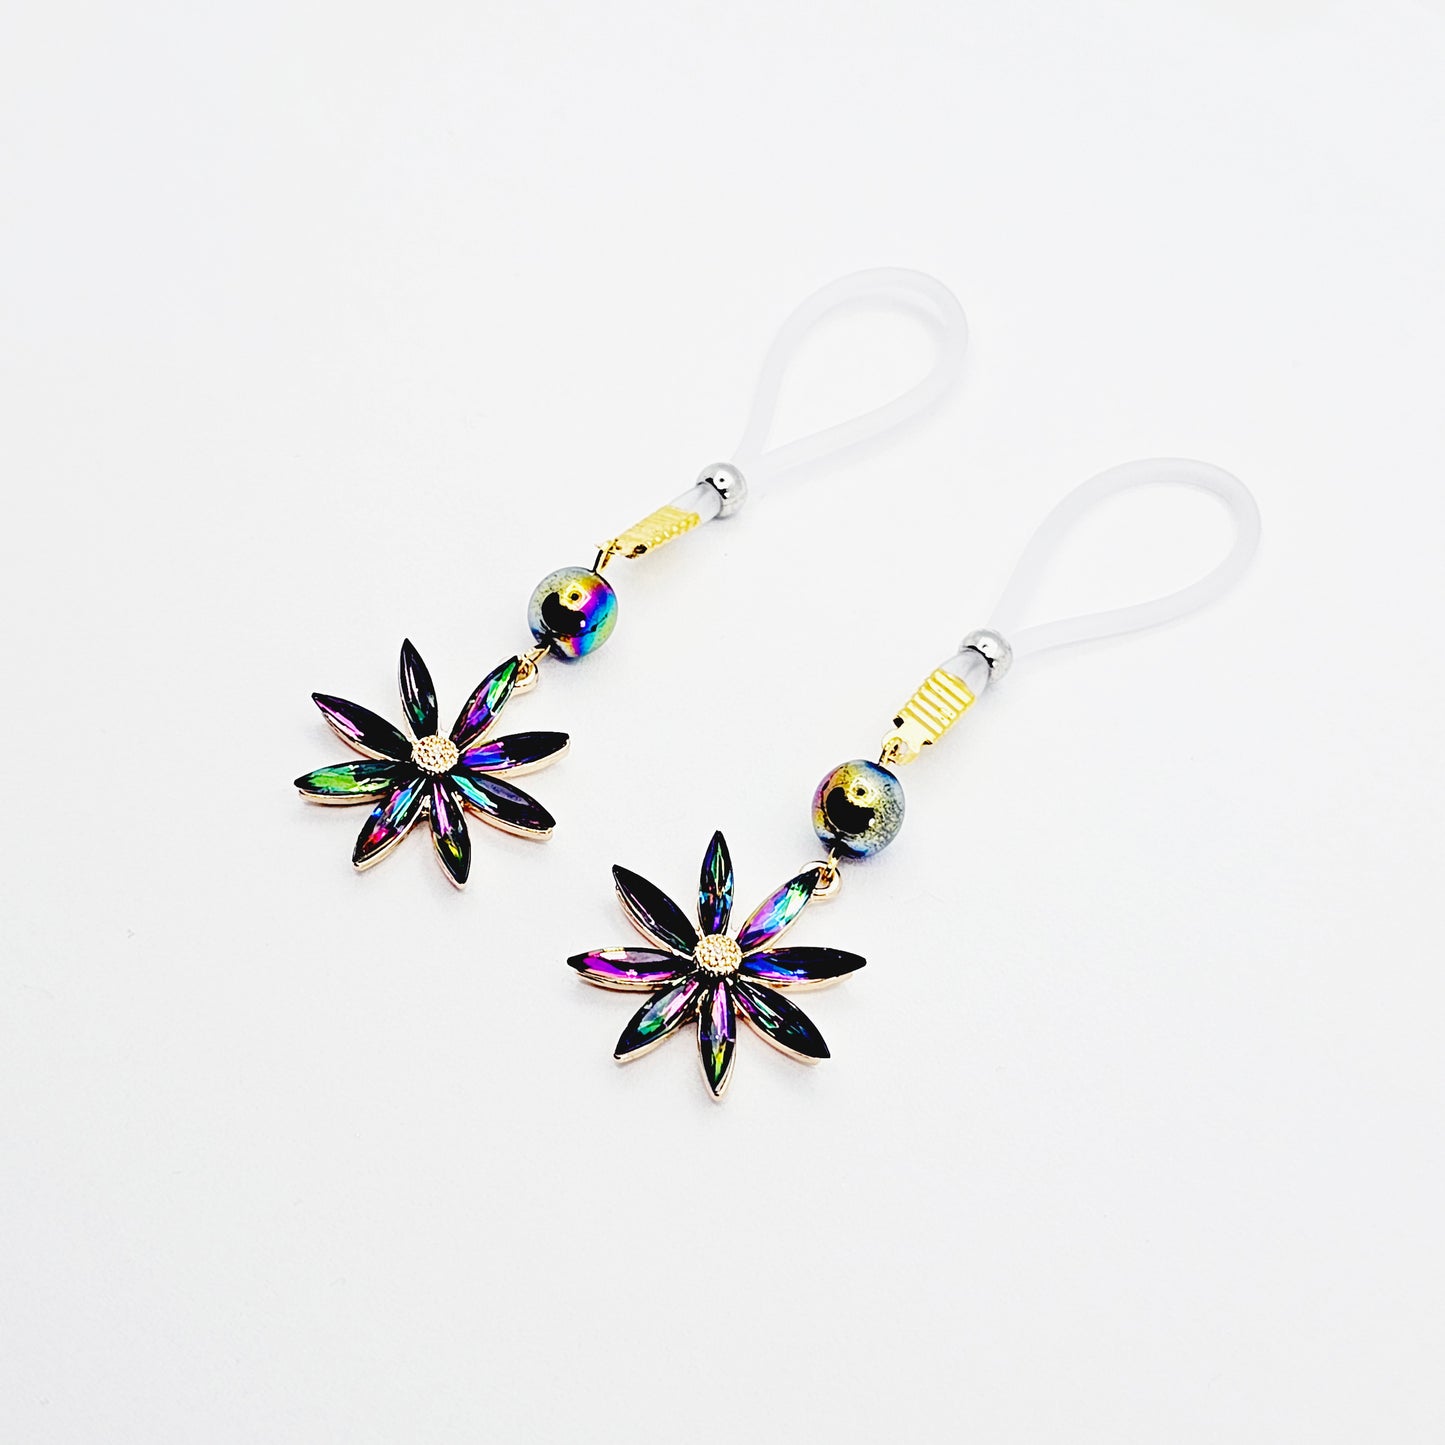 Non Piercing Nipple Nooses or Nipple Clamps with Colorful Flowers.